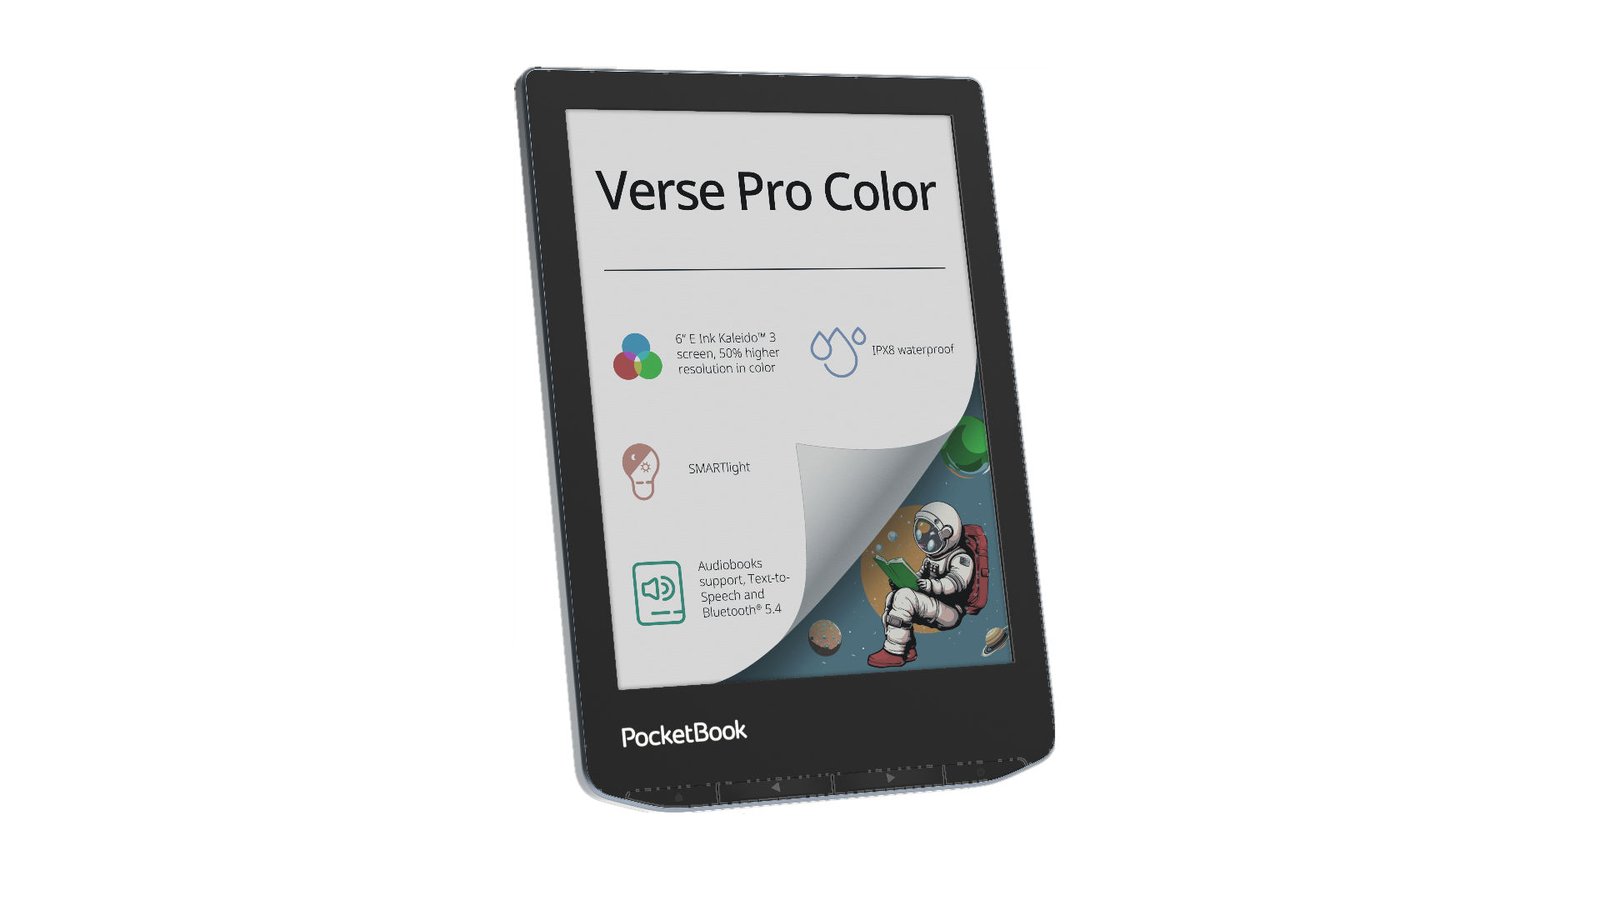 Pocketbook Verse Pro Color e-reader is coming